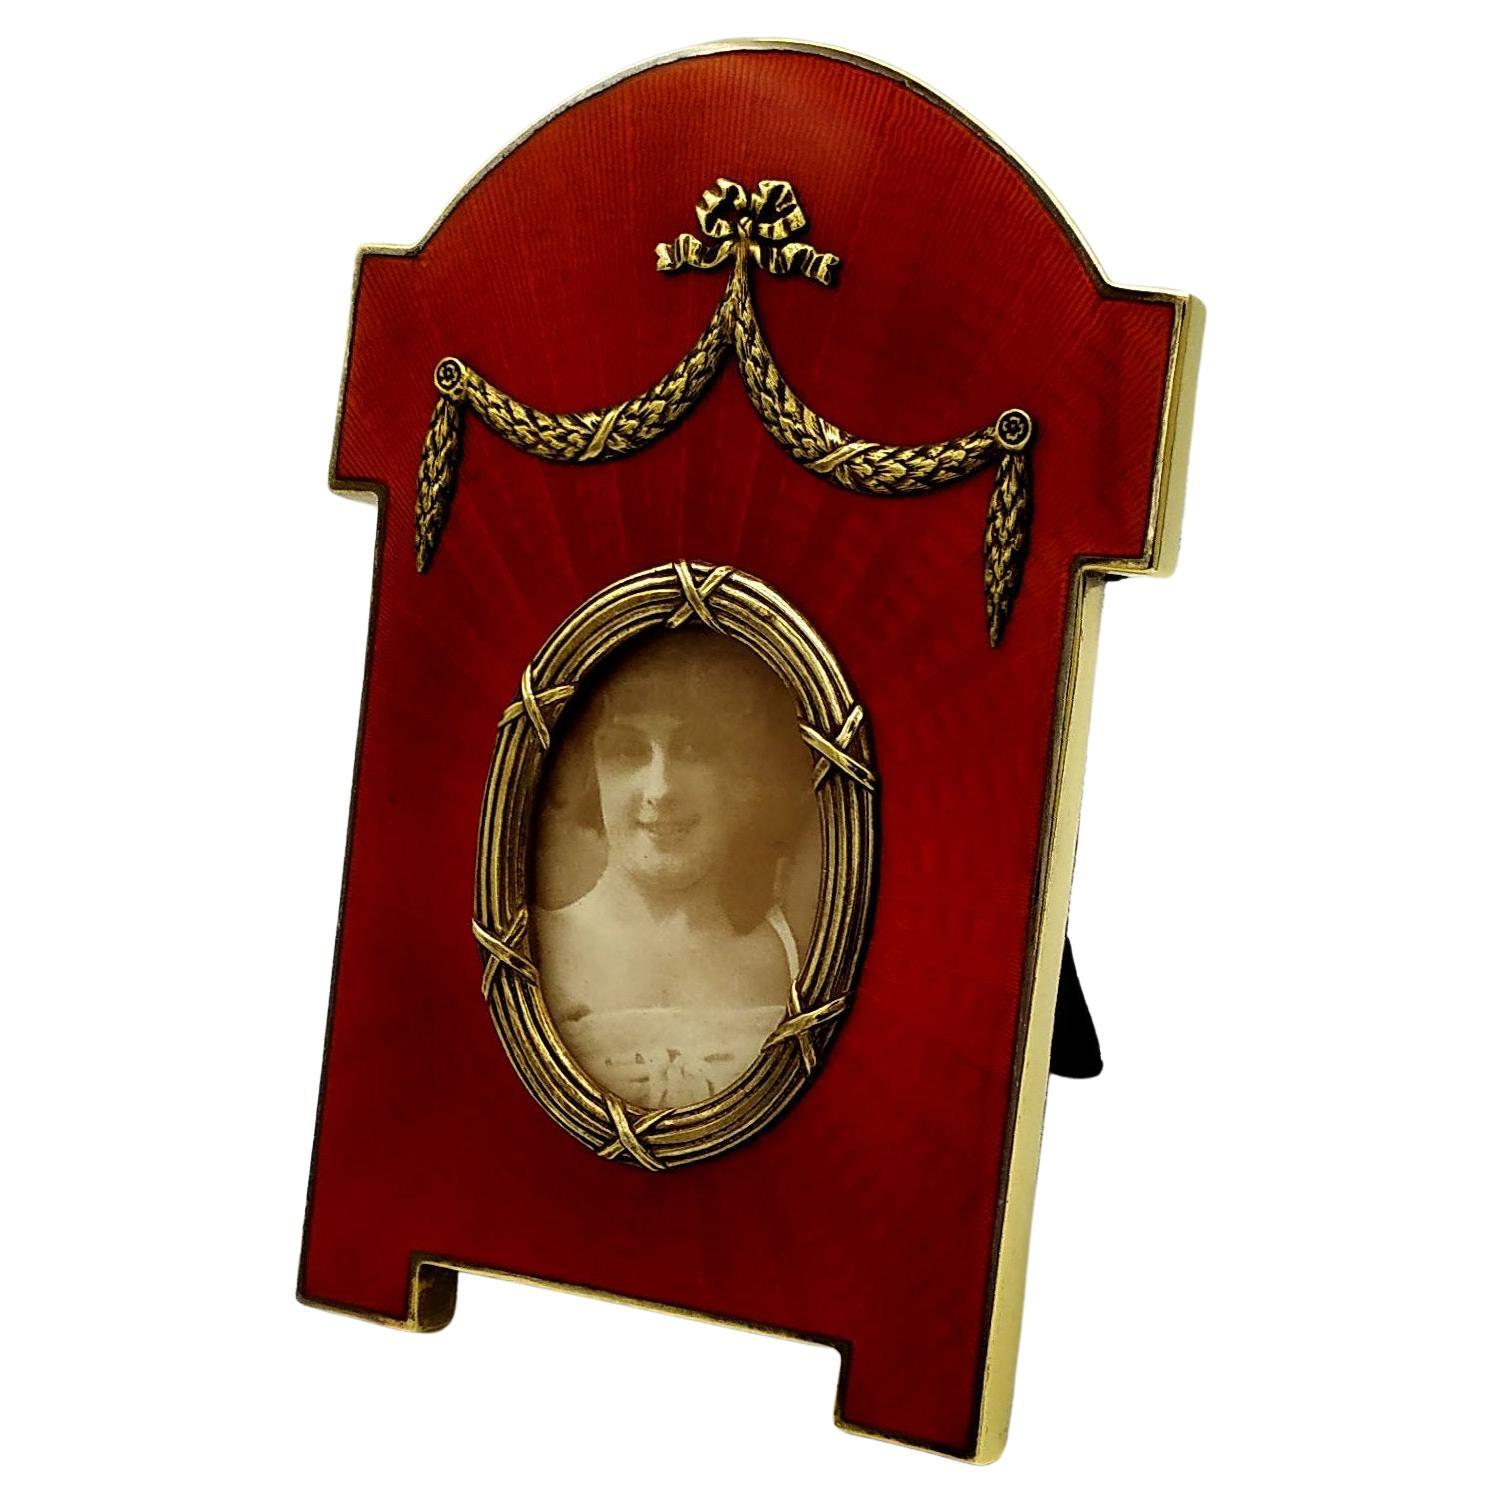 Photo Frame Red Enamel Guillochè and Hand Engravings Sterling Silver Salimbeni